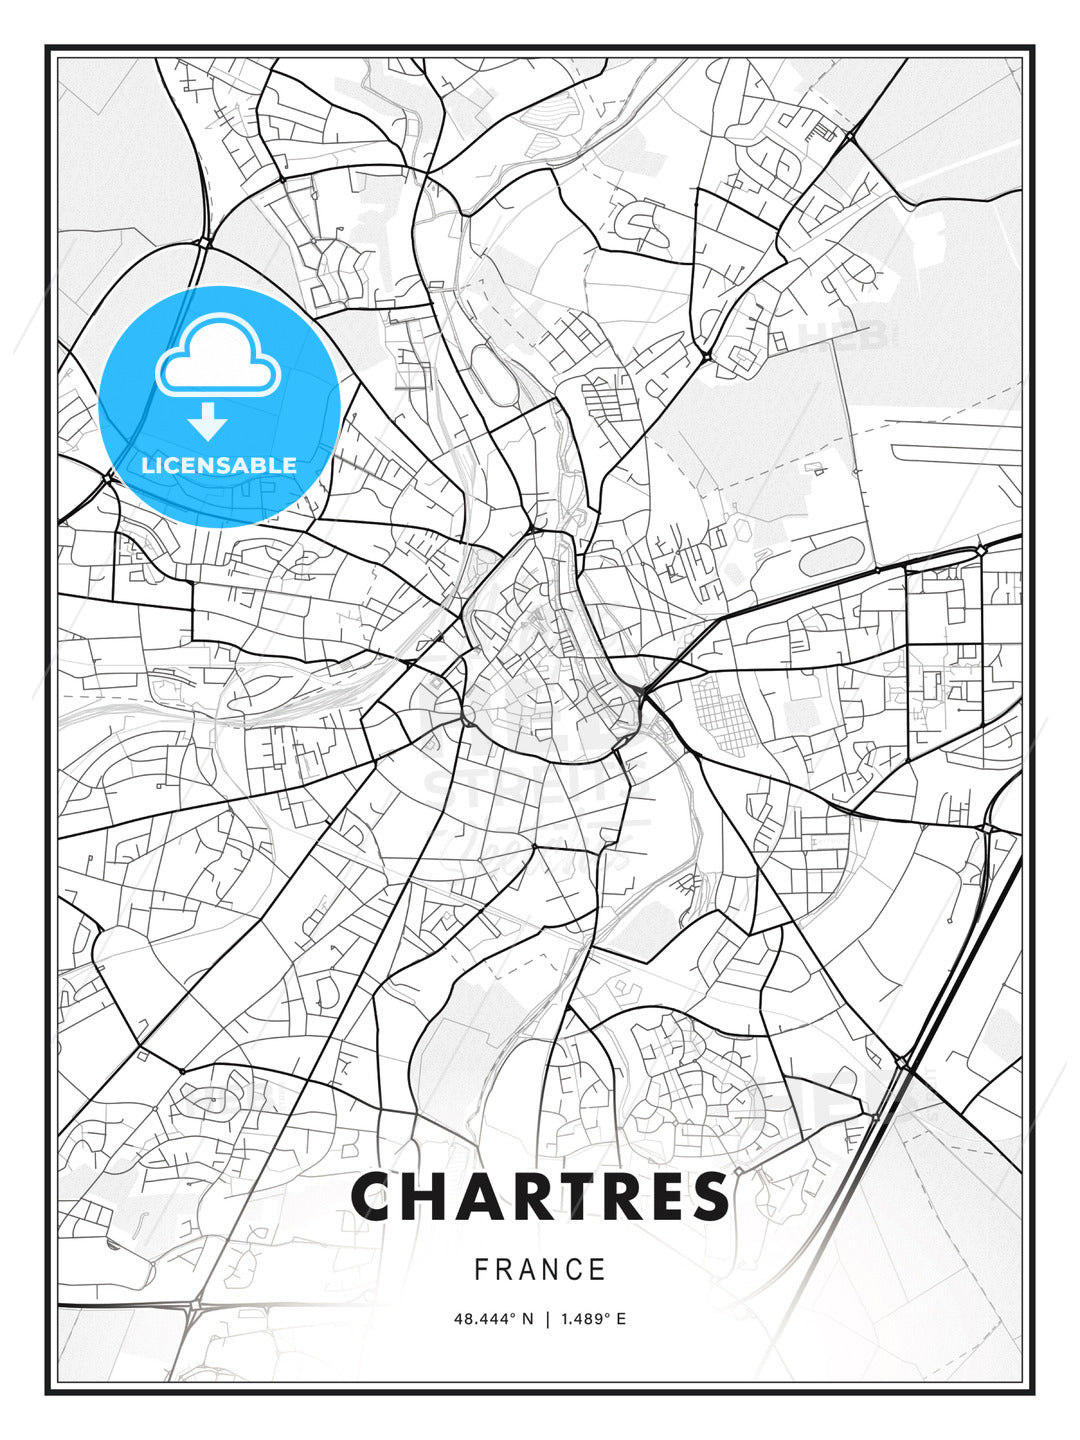 Chartres, France, Modern Print Template in Various Formats - HEBSTREITS Sketches